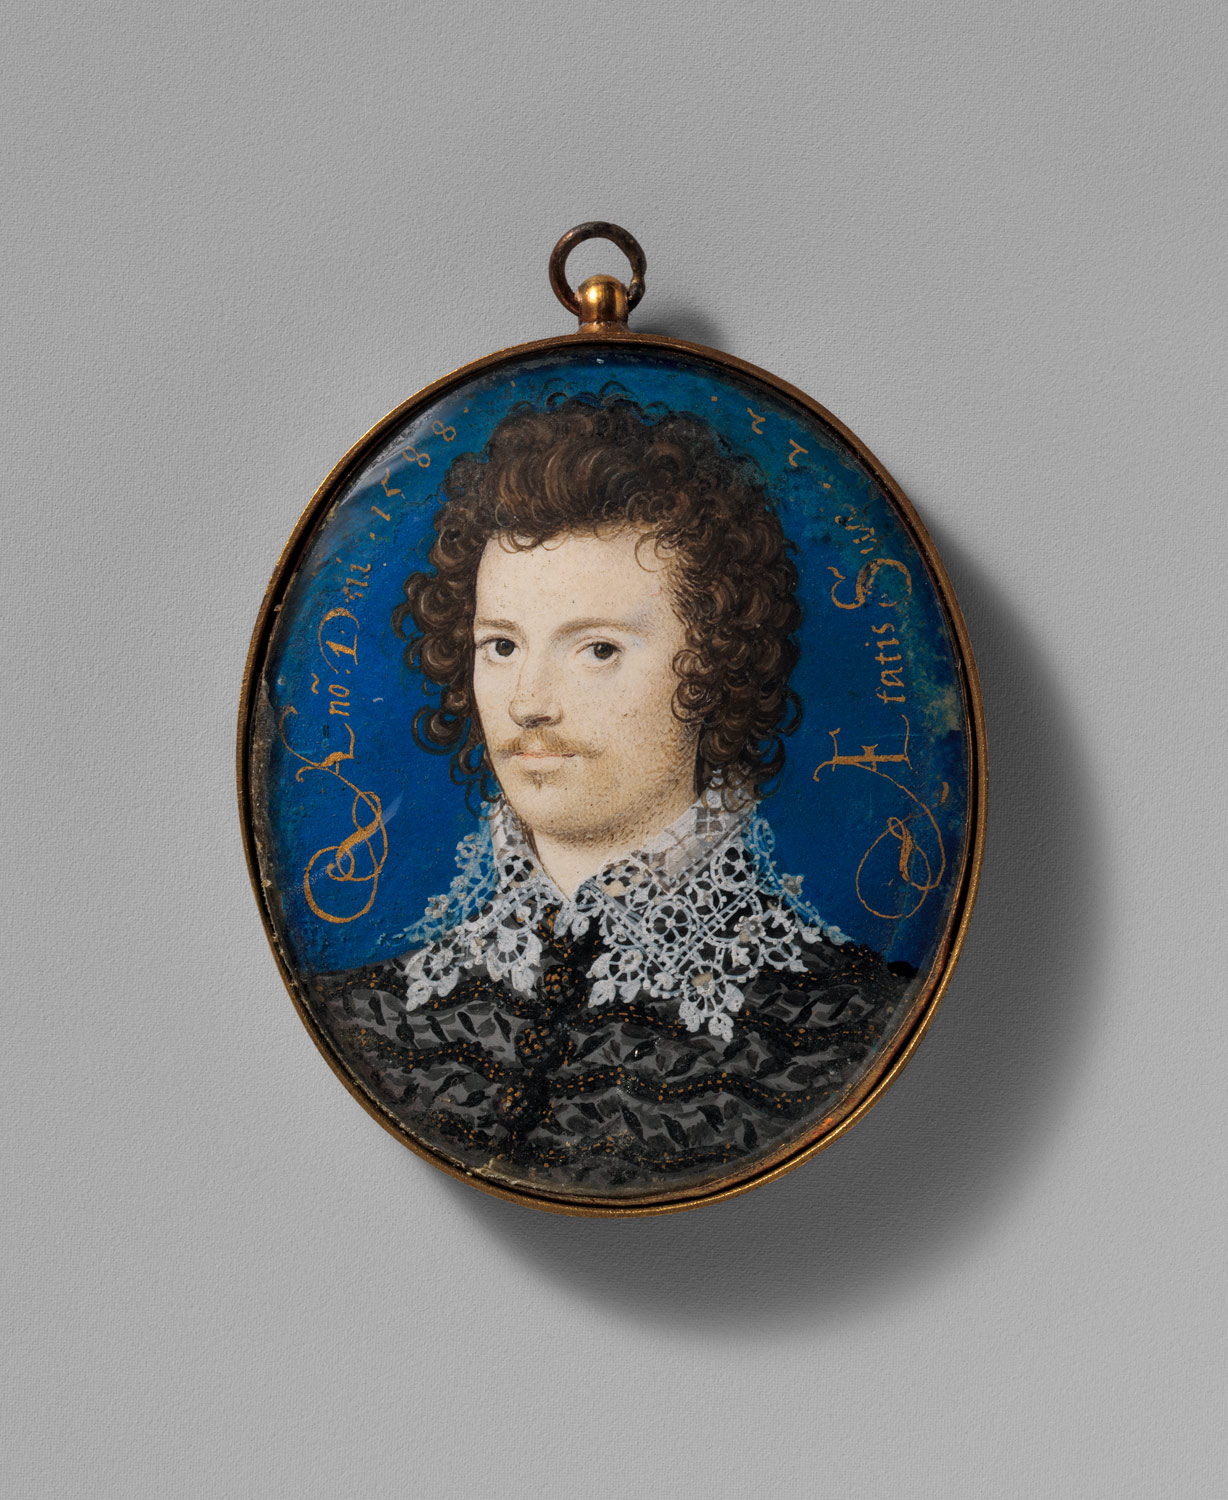 Portrait of a Young Man, Probably Robert Devereux (1566-1601), Second Earl of Essex